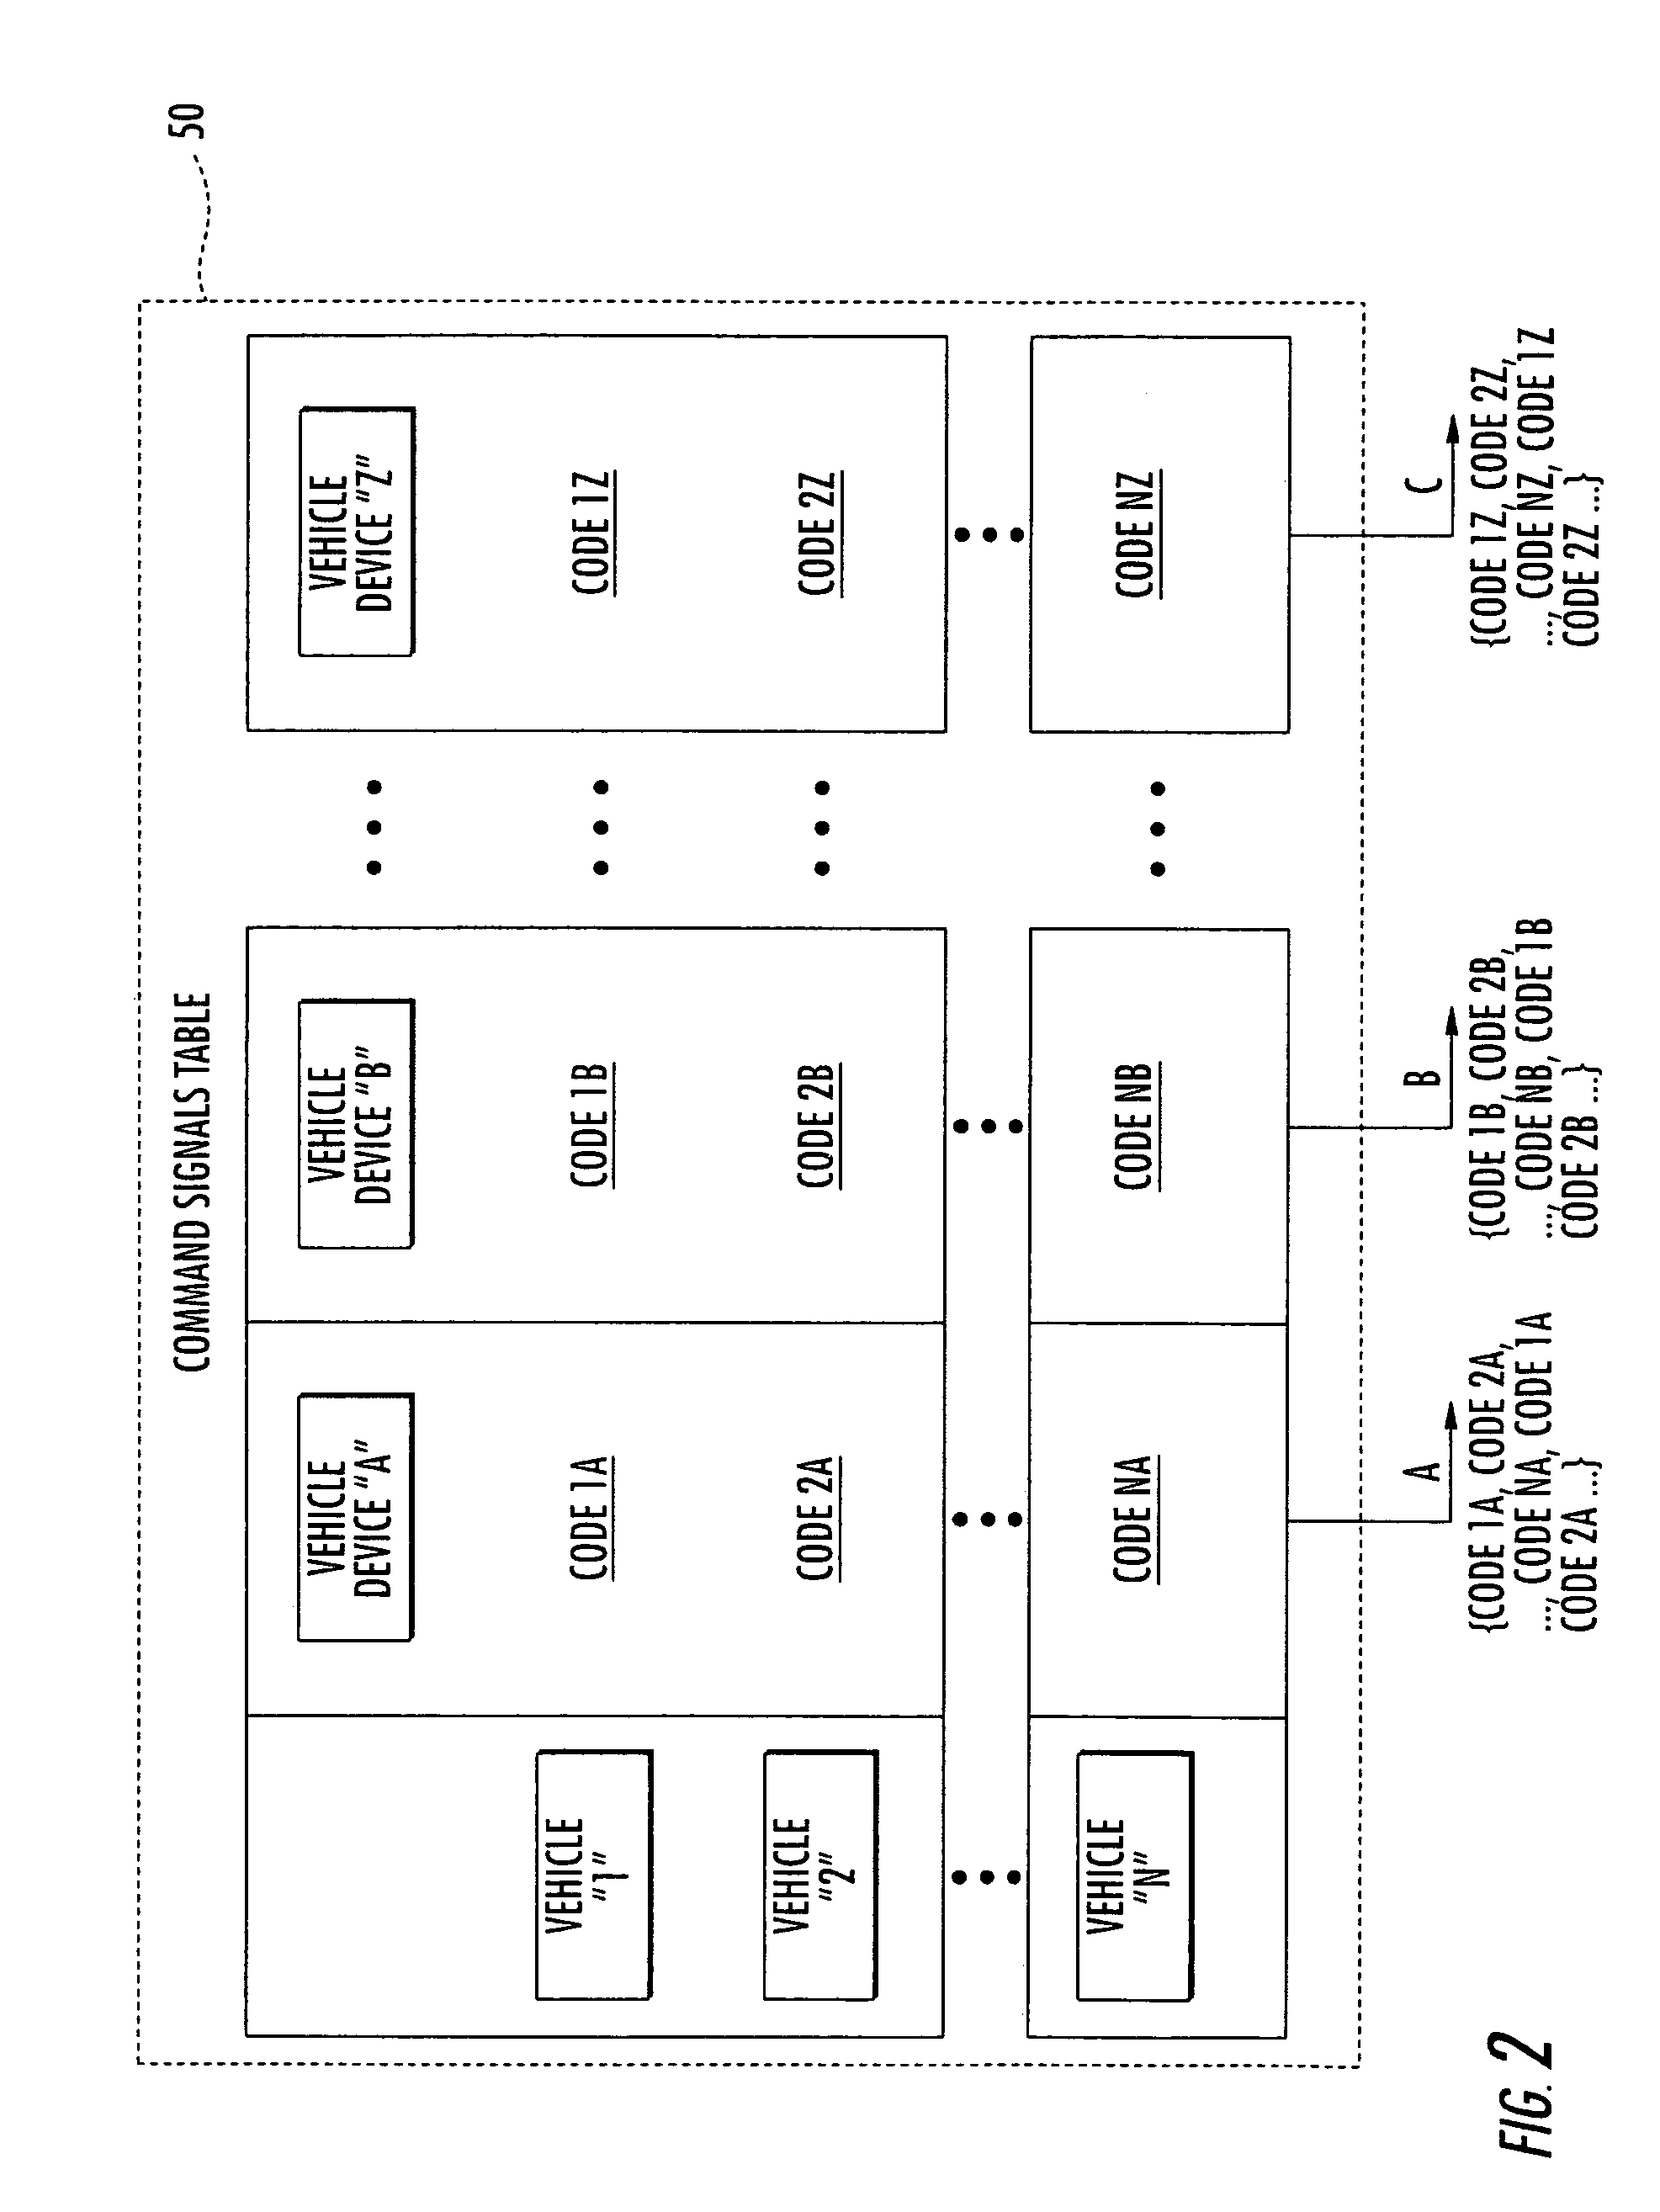 Remote start control system including an engine speed data bus reader and related methods